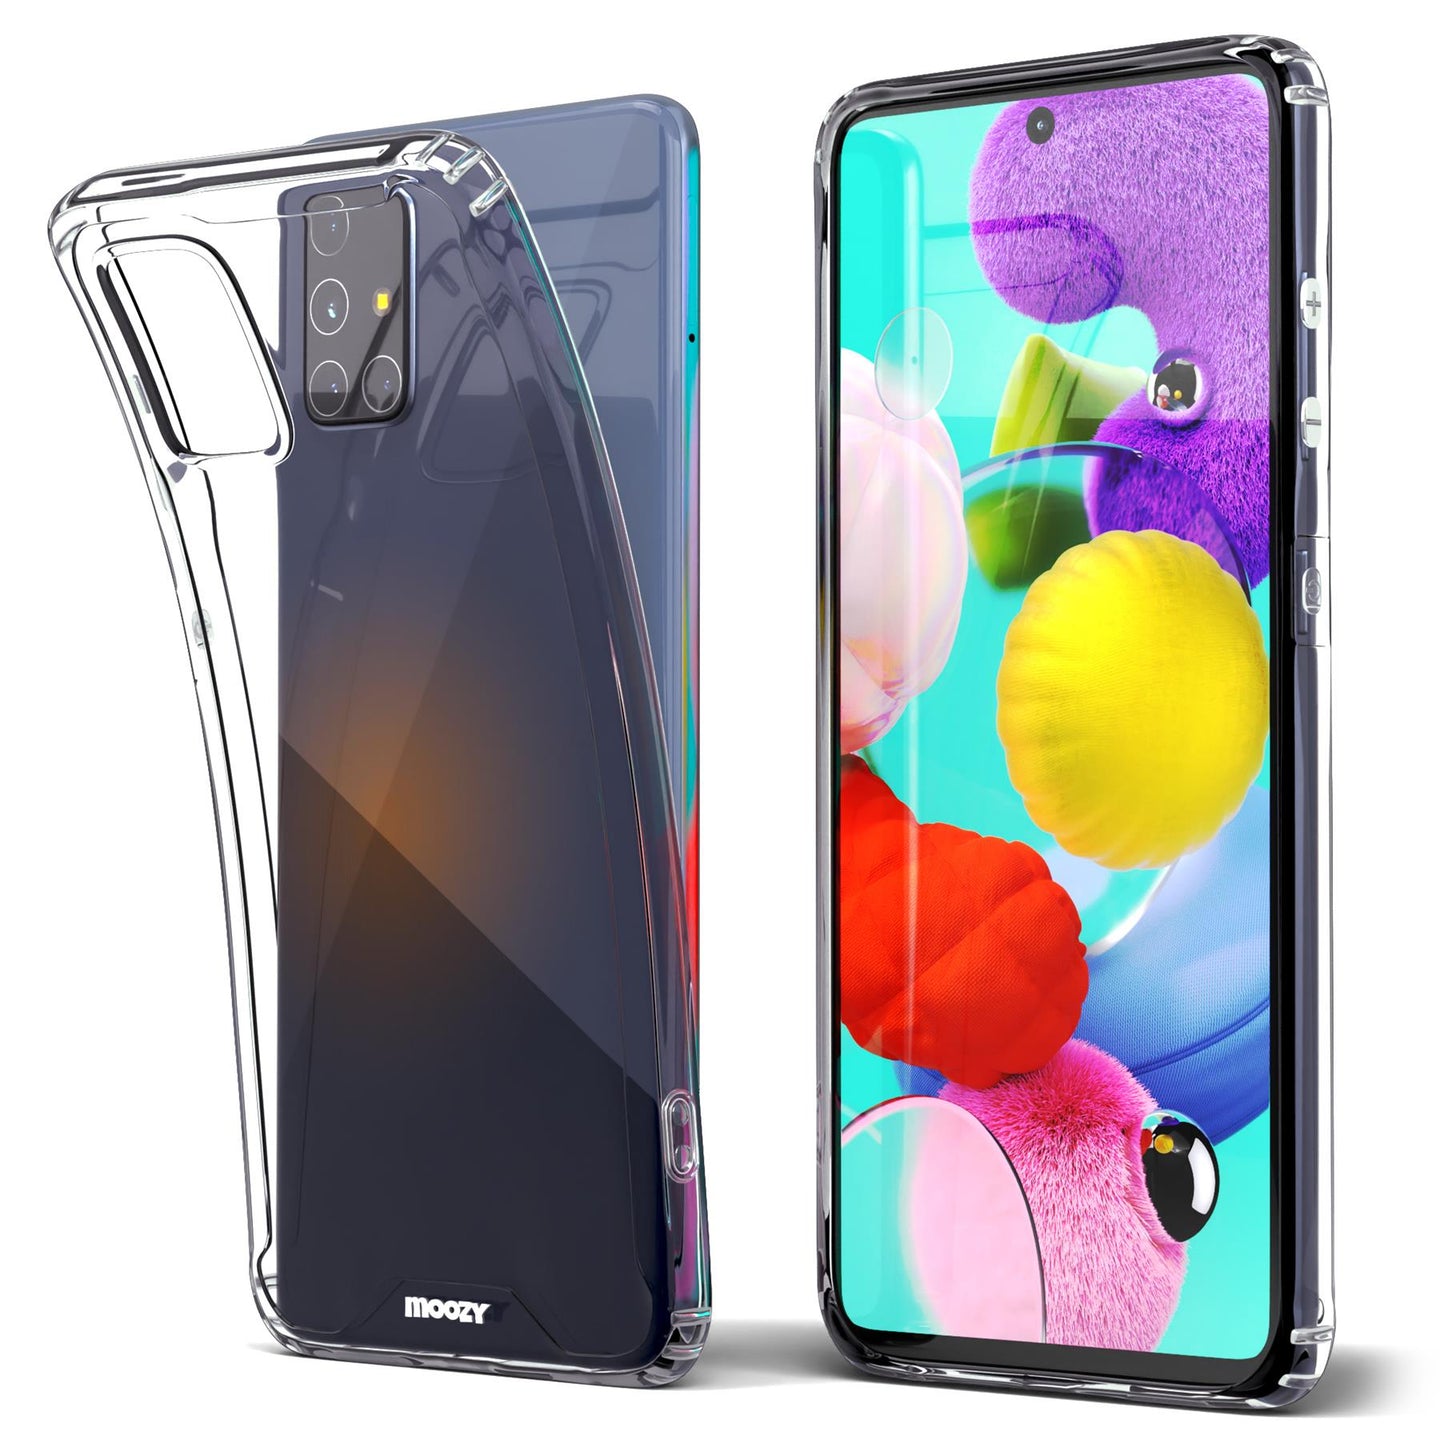 Moozy Xframe Shockproof Case for Samsung A51 - Transparent Rim Case, Double Colour Clear Hybrid Cover with Shock Absorbing TPU Rim